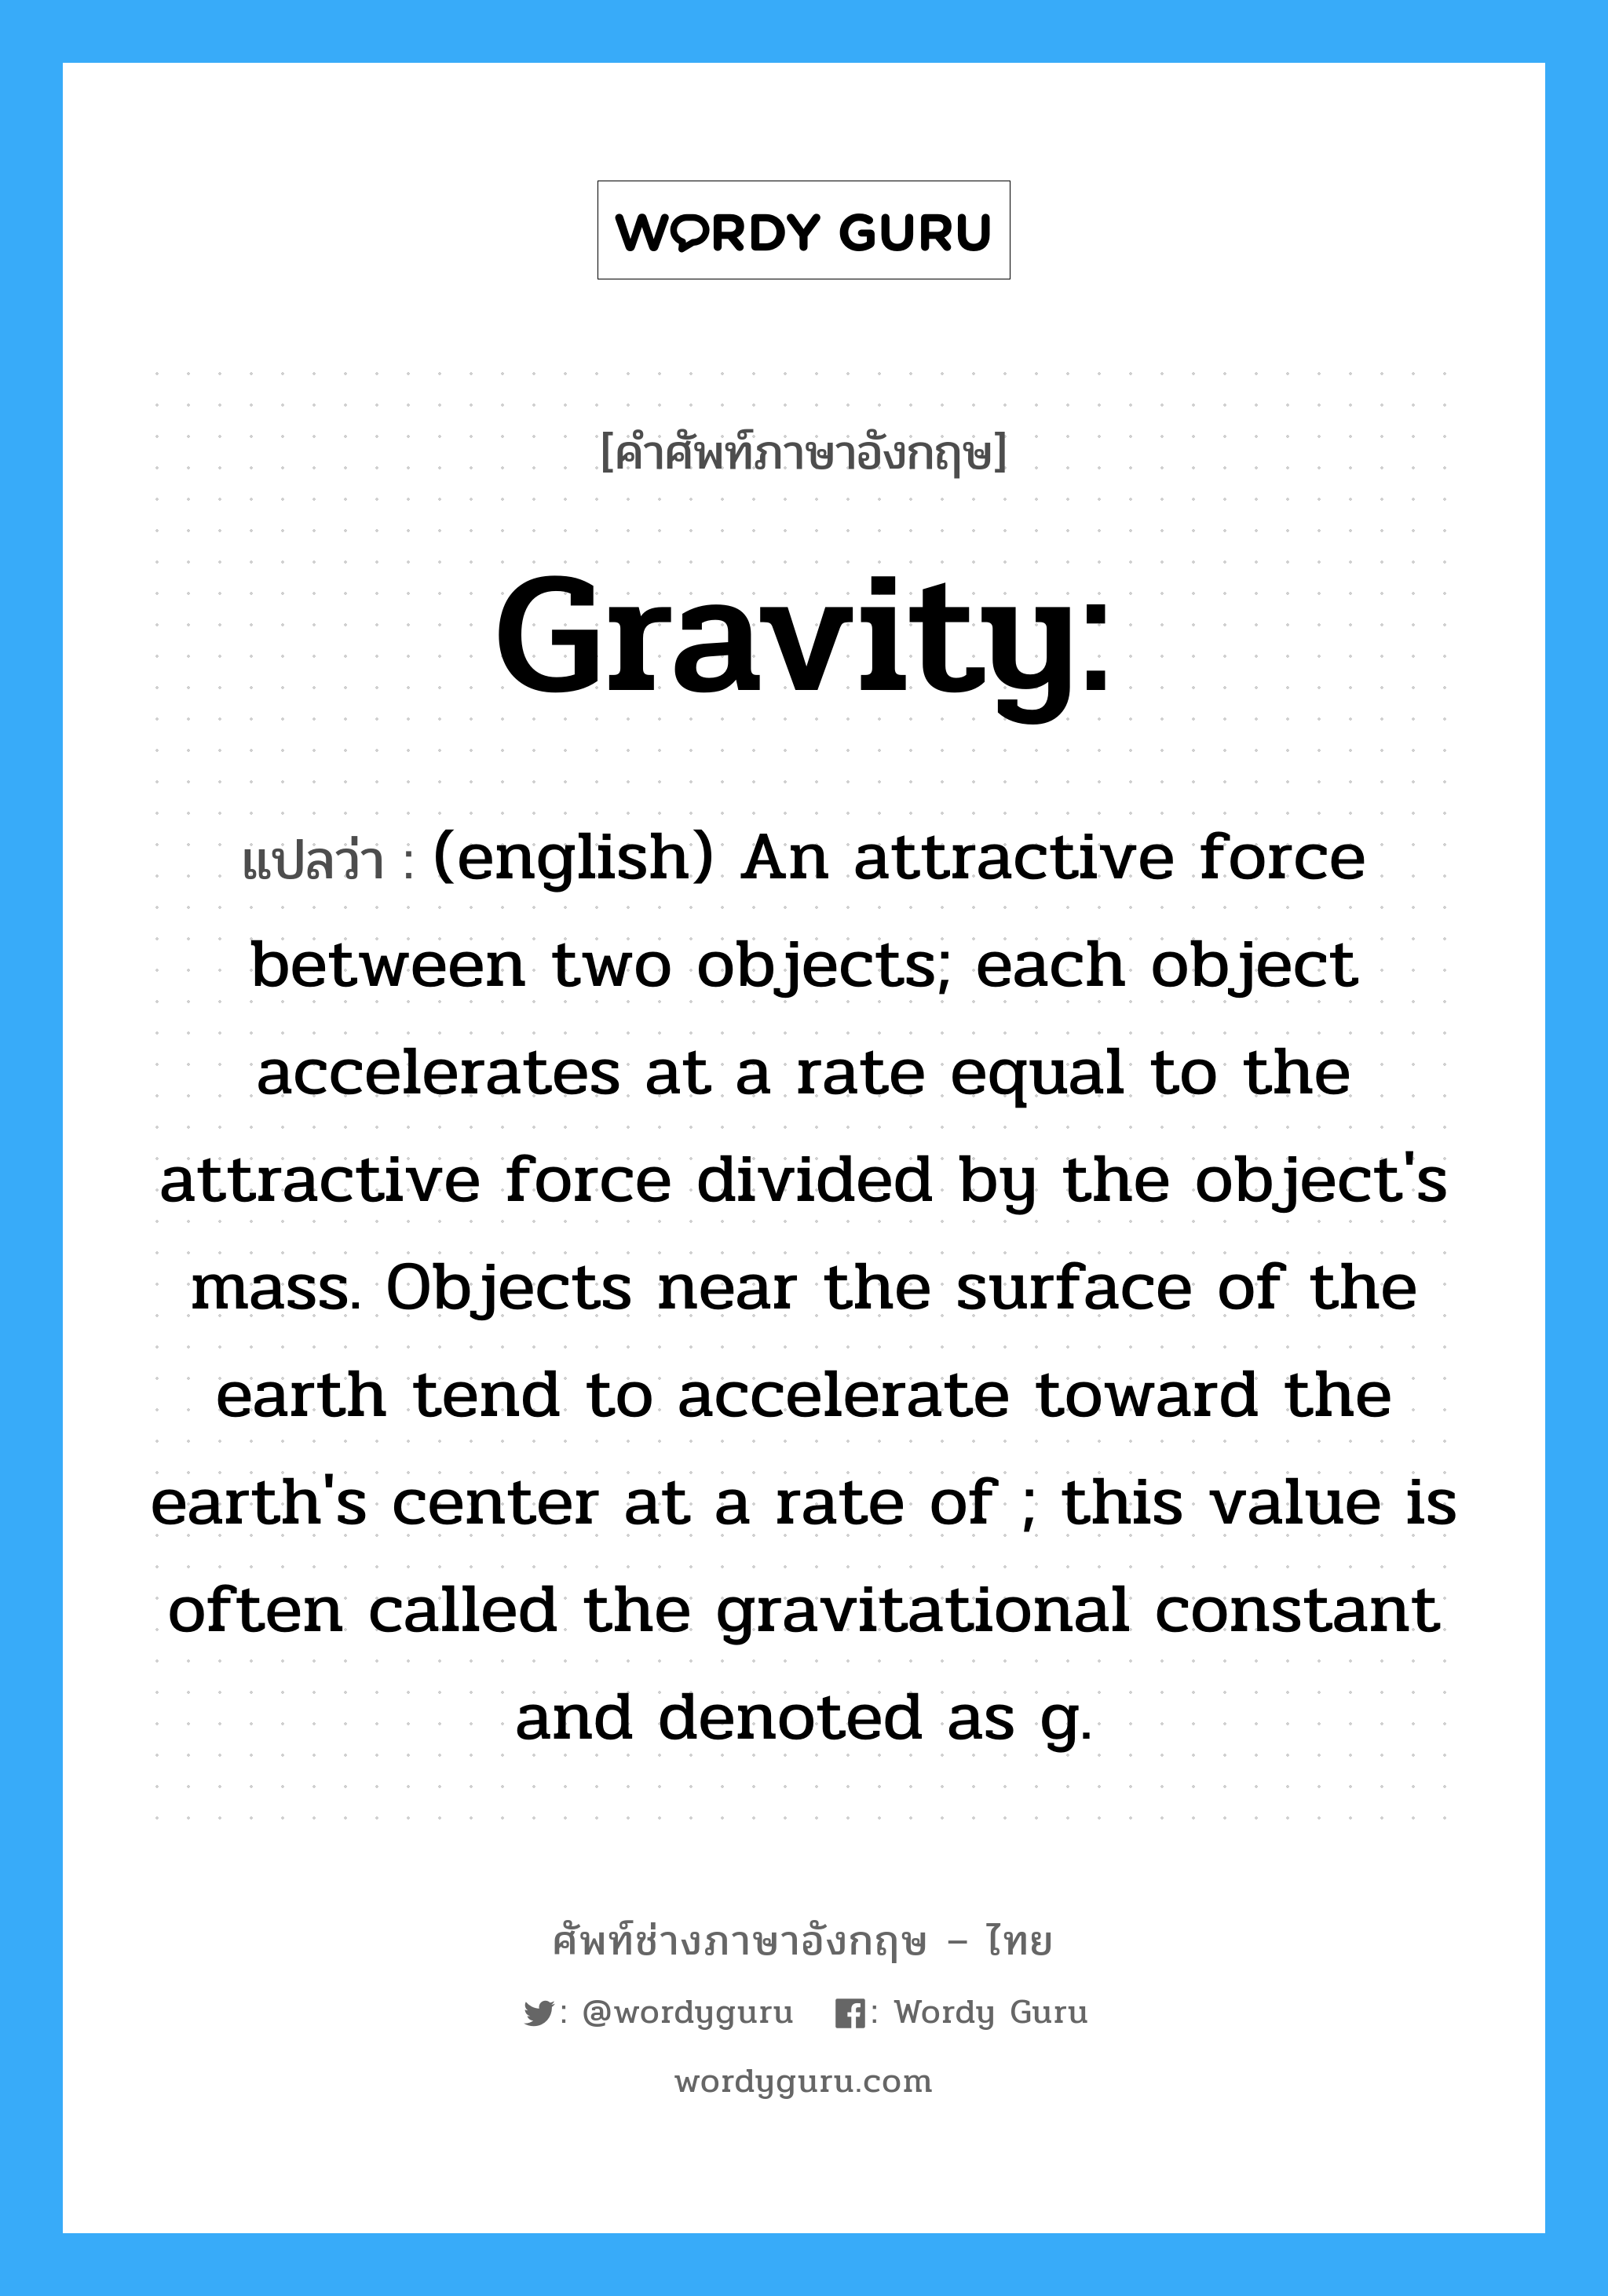 (english) An attractive force between two objects; each object accelerates at a rate equal to the attractive force divided by the object's mass. Objects near the surface of the earth tend to accelerate toward the earth's center at a rate of ; this value is often called the gravitational constant and denoted as g. ภาษาอังกฤษ?, คำศัพท์ช่างภาษาอังกฤษ - ไทย (english) An attractive force between two objects; each object accelerates at a rate equal to the attractive force divided by the object's mass. Objects near the surface of the earth tend to accelerate toward the earth's center at a rate of ; this value is often called the gravitational constant and denoted as g. คำศัพท์ภาษาอังกฤษ (english) An attractive force between two objects; each object accelerates at a rate equal to the attractive force divided by the object's mass. Objects near the surface of the earth tend to accelerate toward the earth's center at a rate of ; this value is often called the gravitational constant and denoted as g. แปลว่า Gravity: